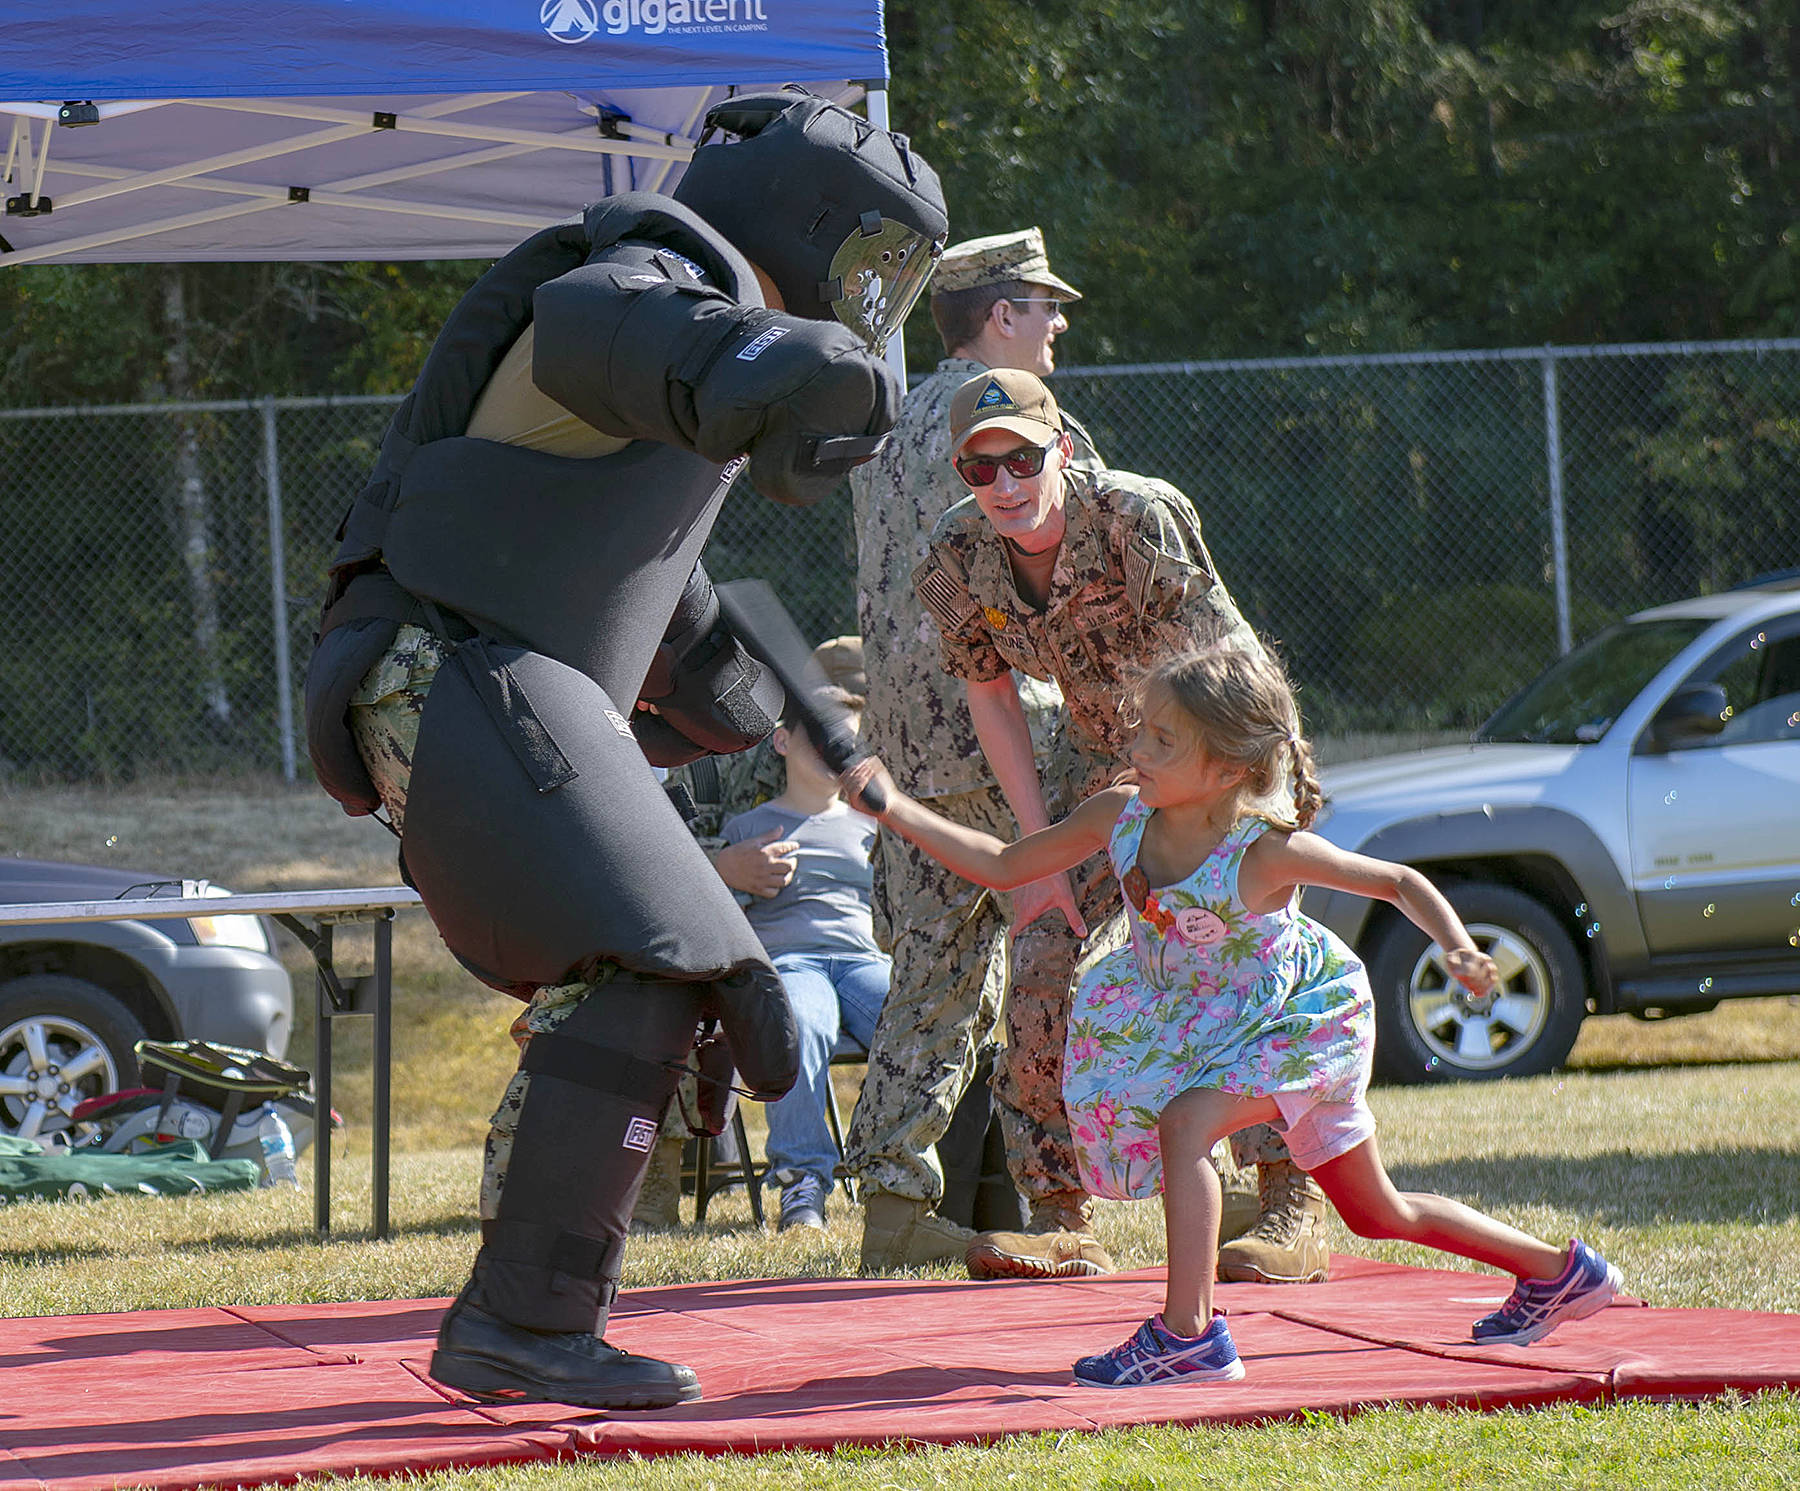 190704-N-HC646-0252 OAK HARBOR, Wash. (August 6, 2019) Master-at-Arms 1st Class Nick Fortune gives instruction during a take down demonstration to visitors in attendance of National Night Out on Fort Nugent Park. National Night Out is an annual community-building campaign that promotes police-community partnerships and neighborhood camaraderie. (U.S. Navy photo by Mass Communication Specialist 2nd Class Marc Cuenca/Released)